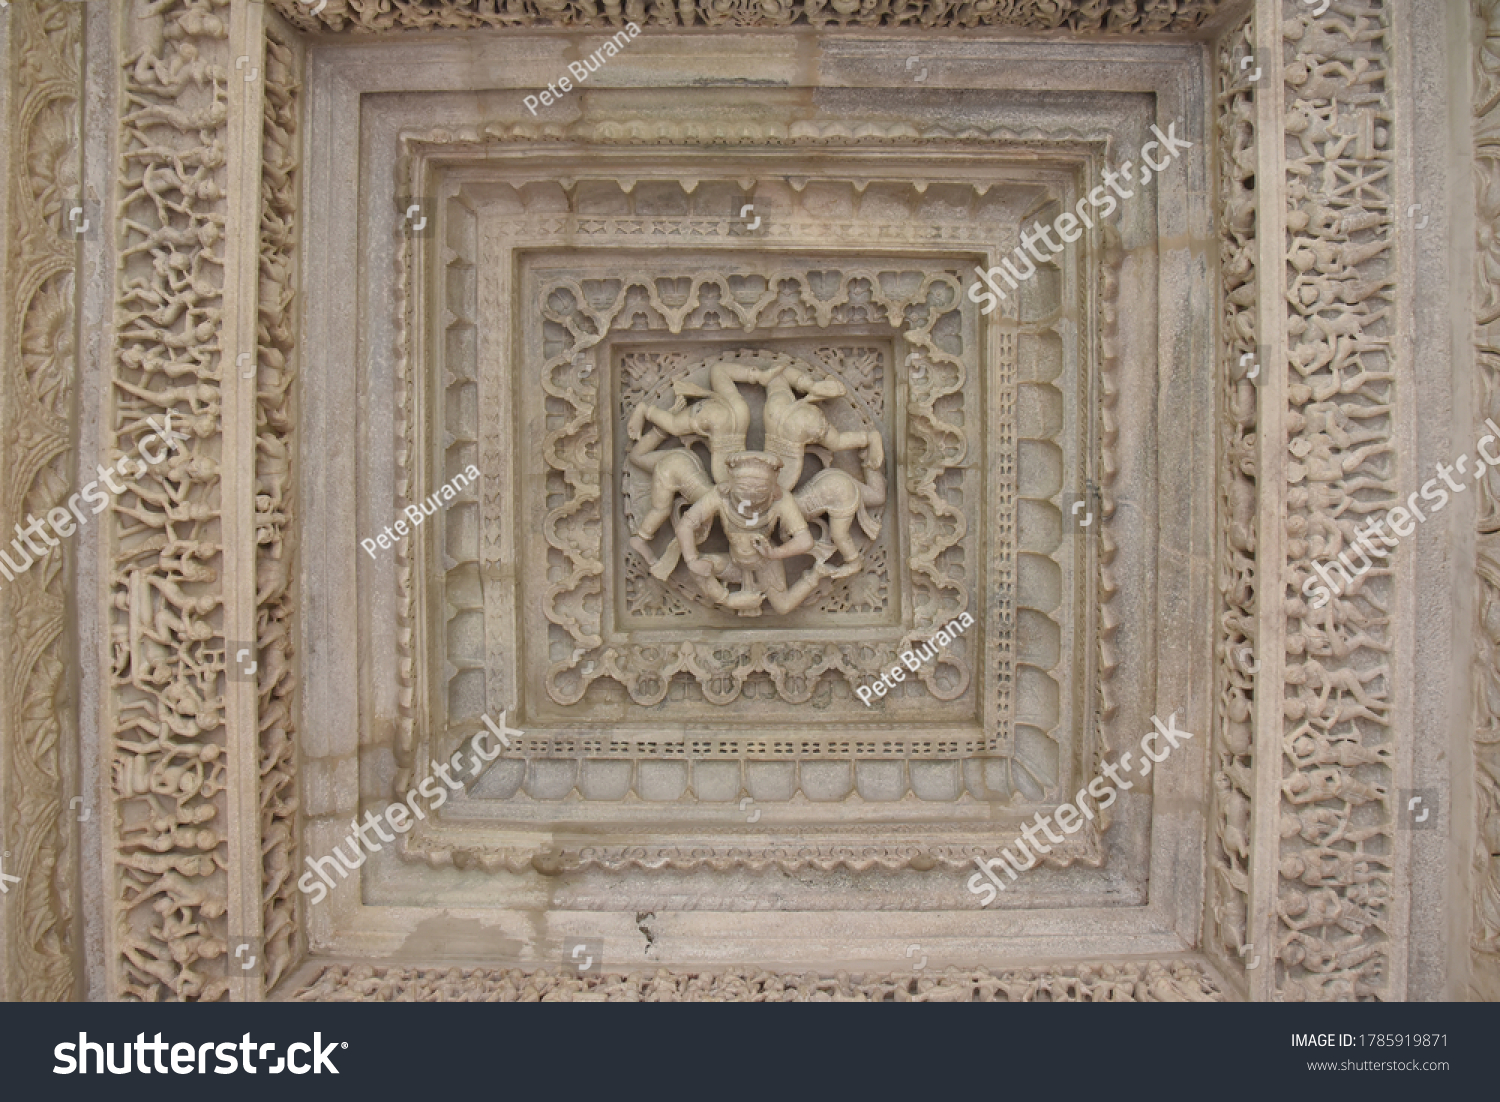 White pink marble stone carvings of ceiling of Jain temple mandir depicting religious murals in Ranakpur Chaumukha temple, Rajasthan, India #1785919871